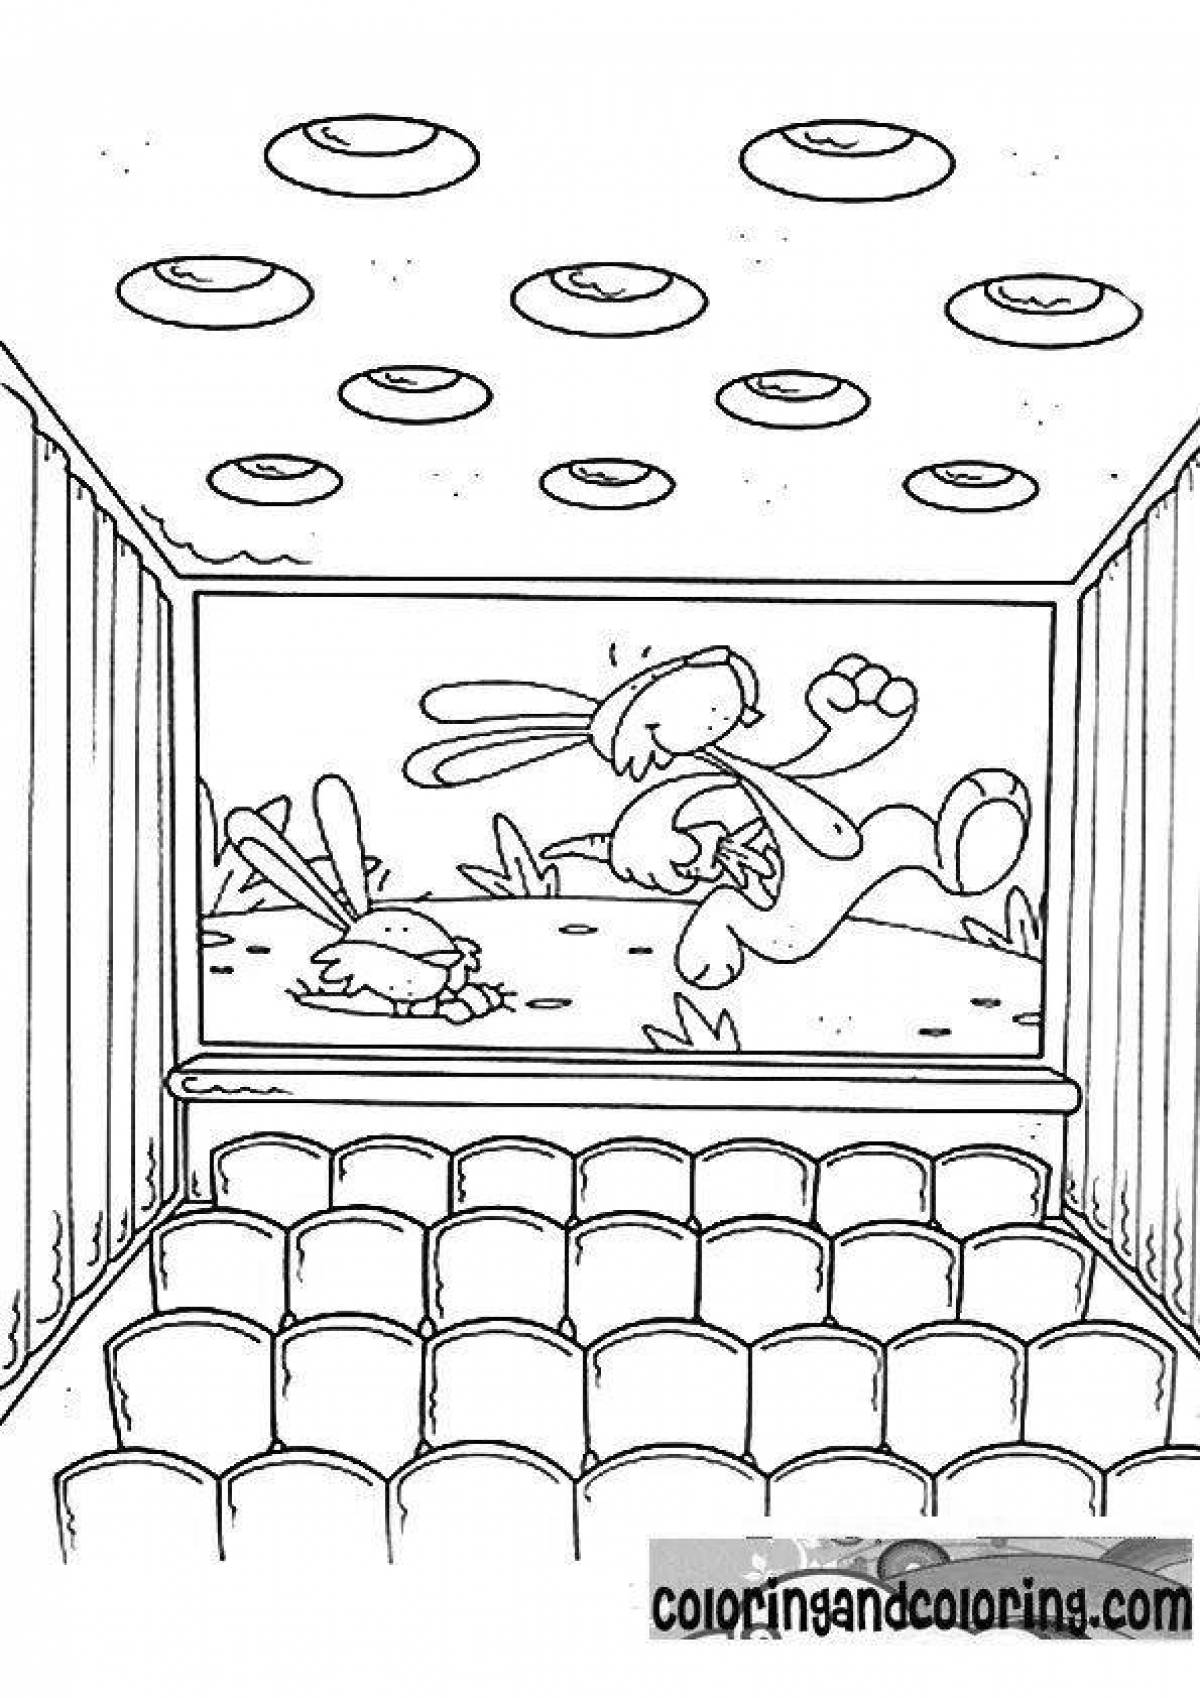 Amazing movie coloring page